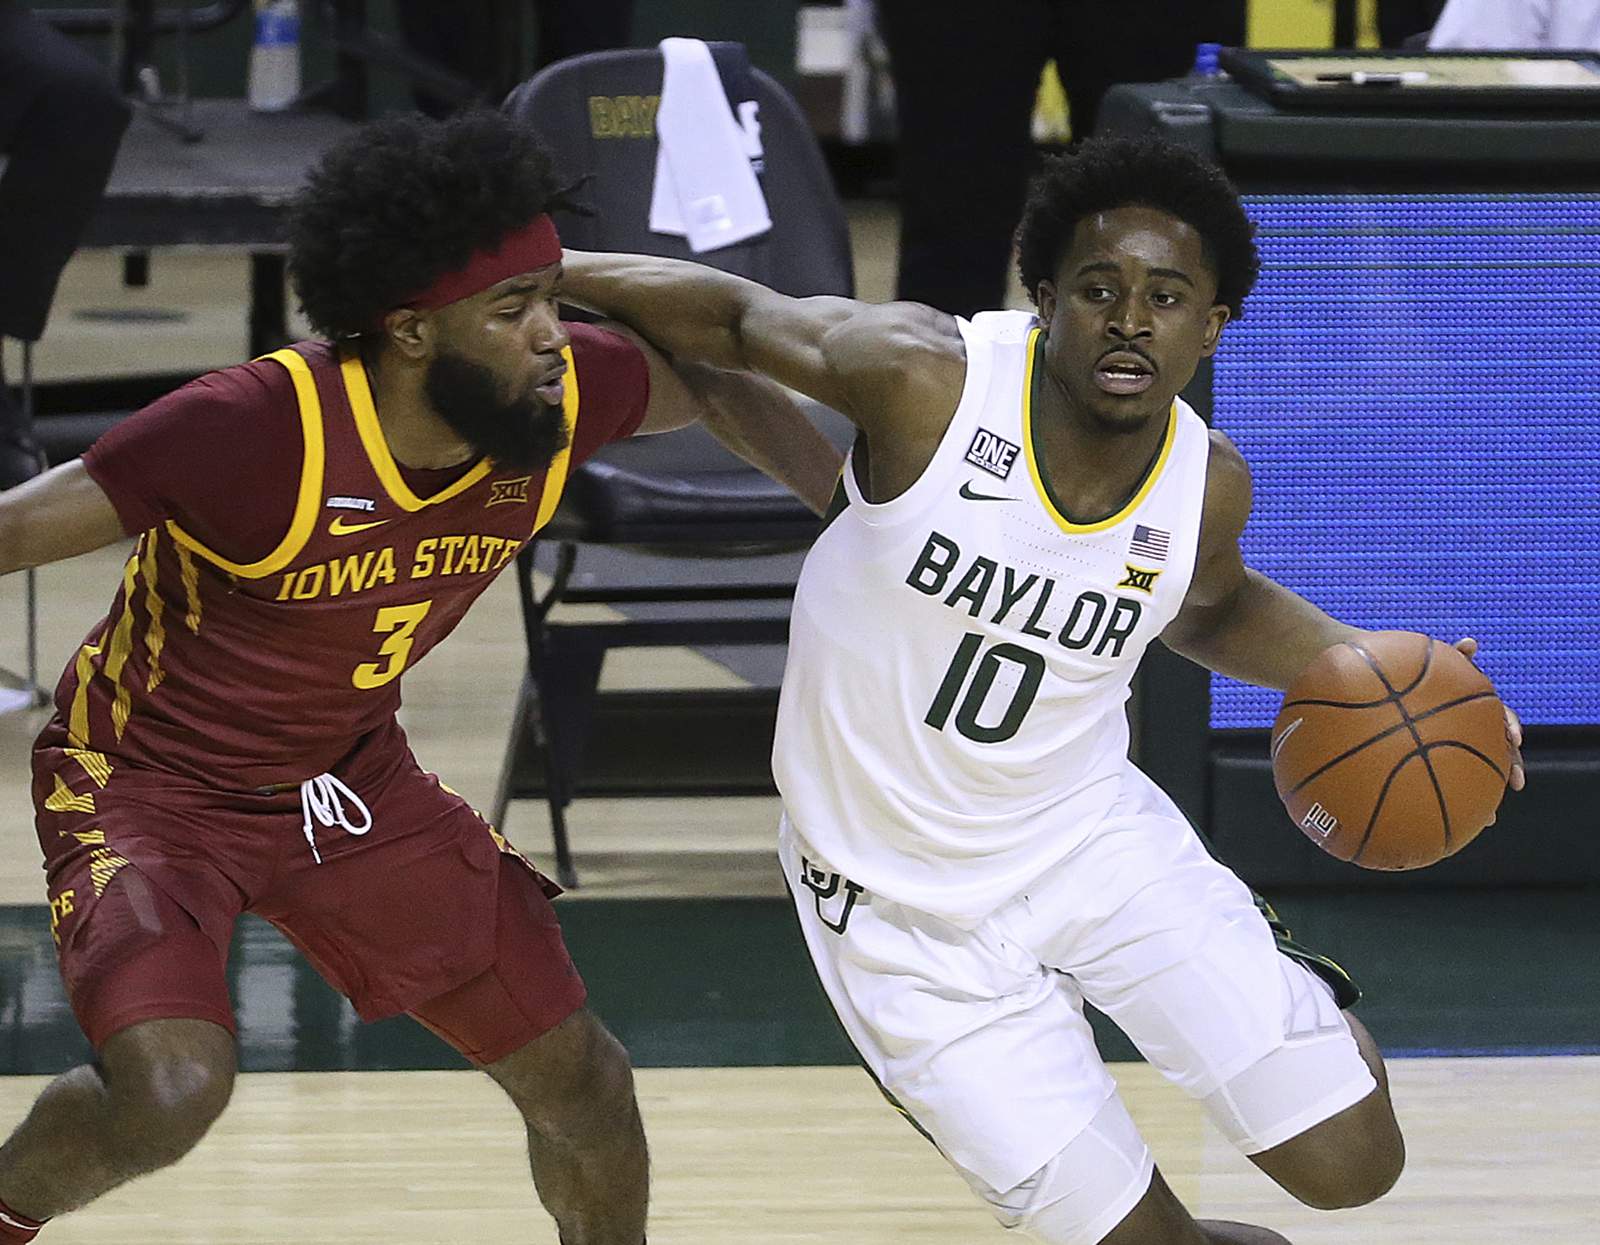 No. 2 Baylor returns with 77-72 win to stay undefeated